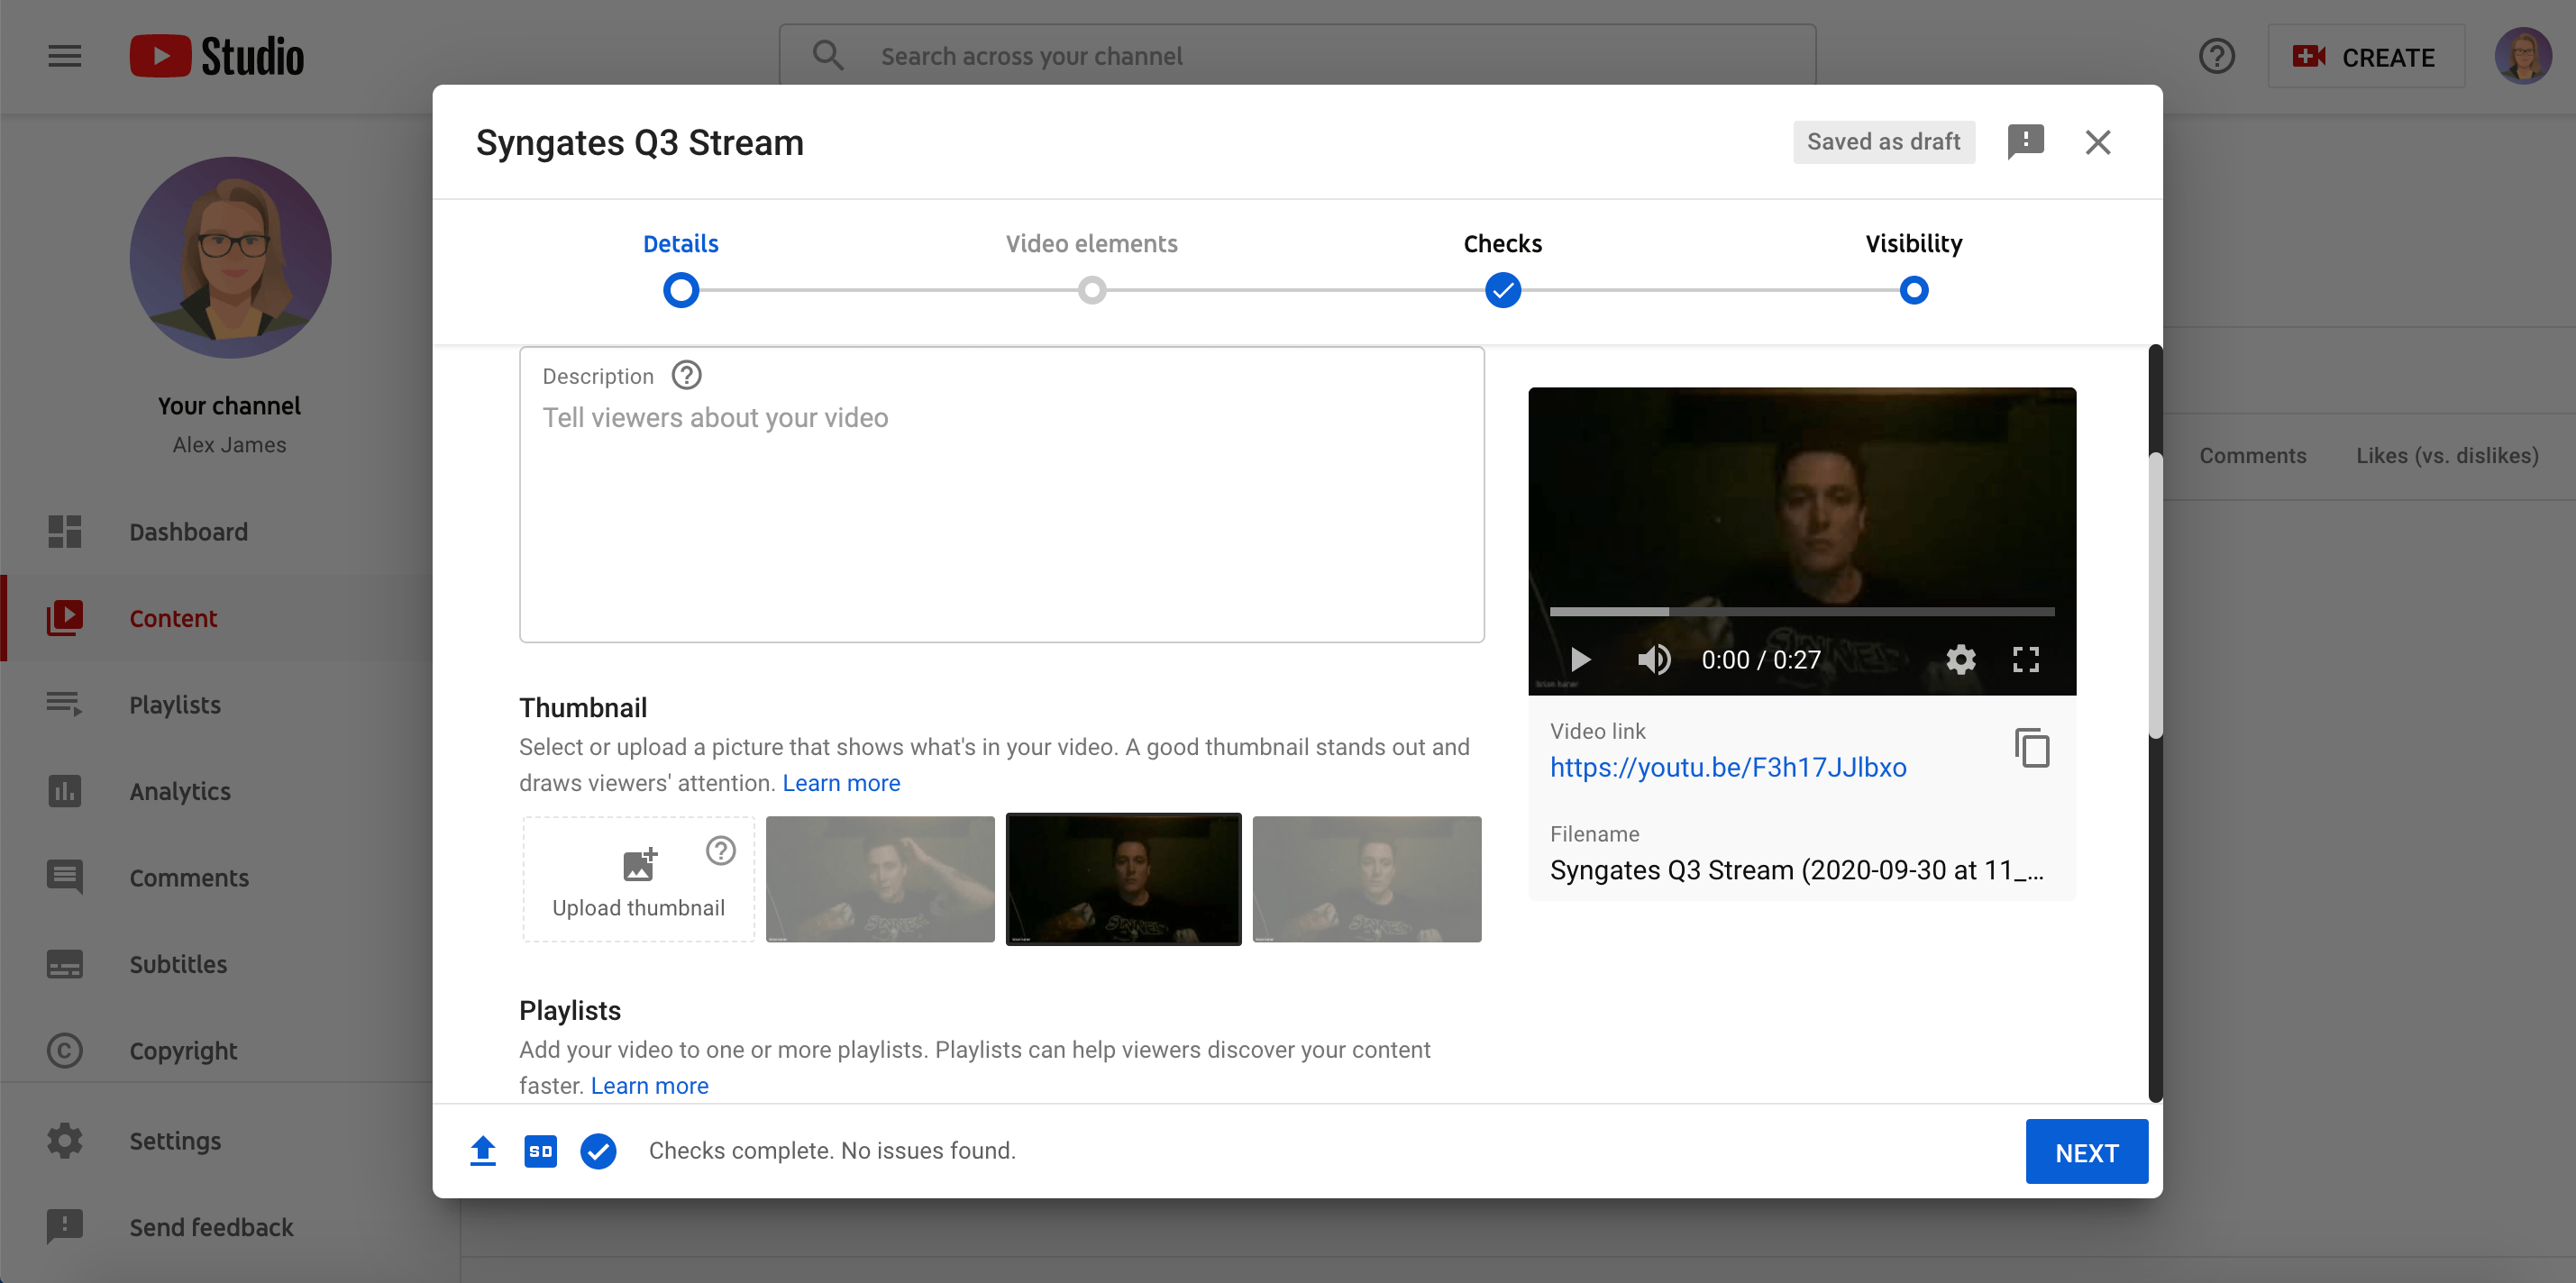 YouTube video details